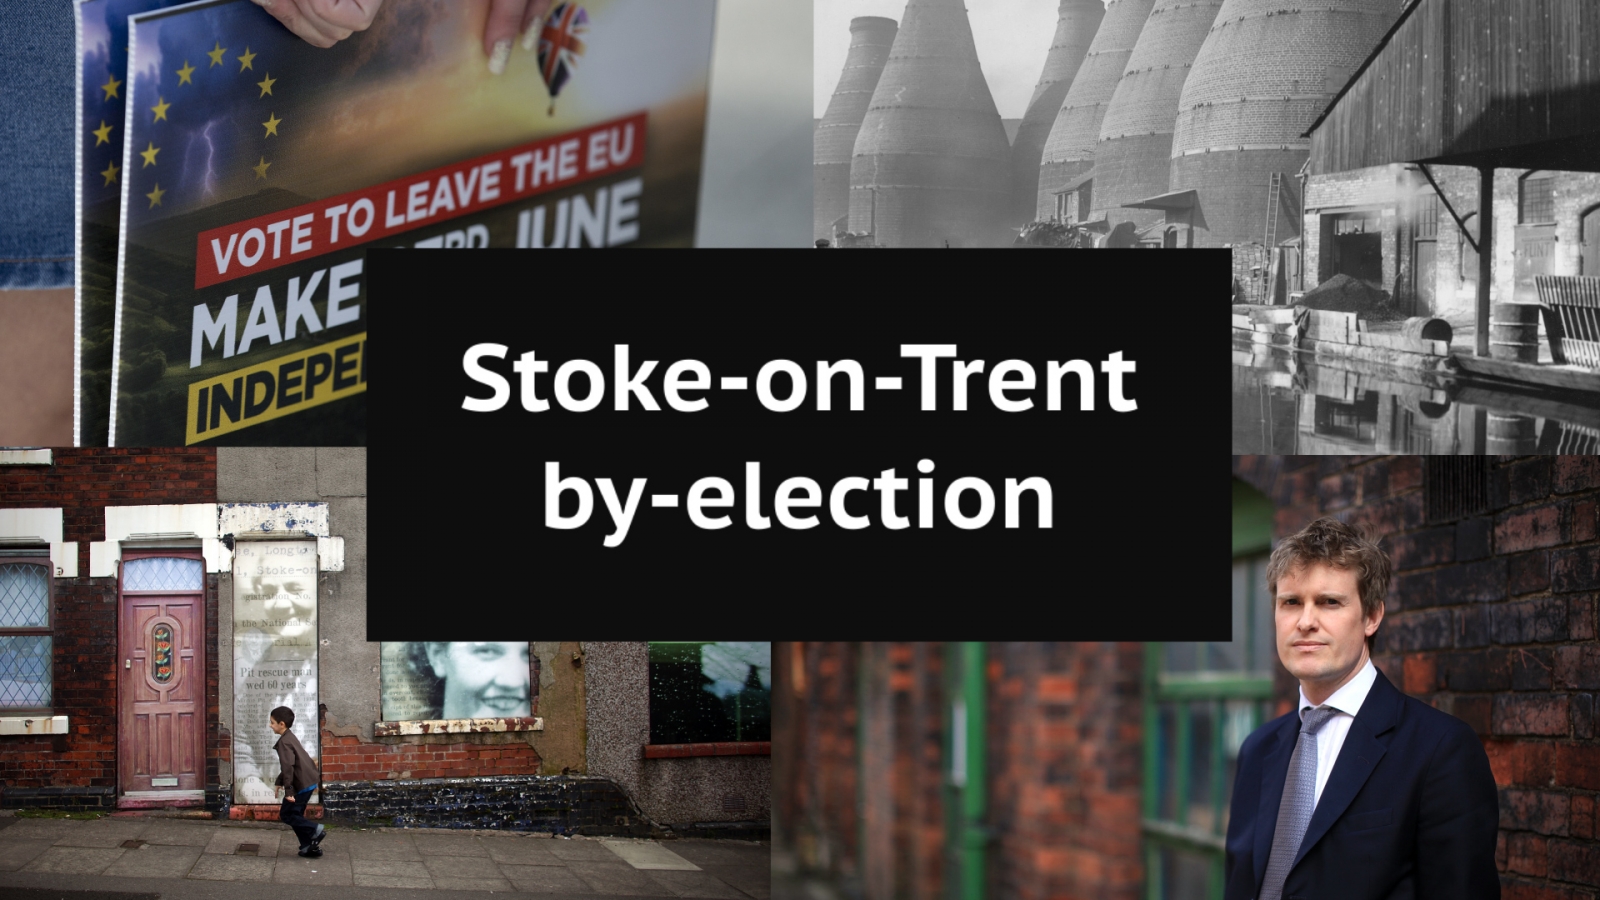 Stoke-on-Trent by-election: What you need to know - IBTimes UK - International Business Times UK